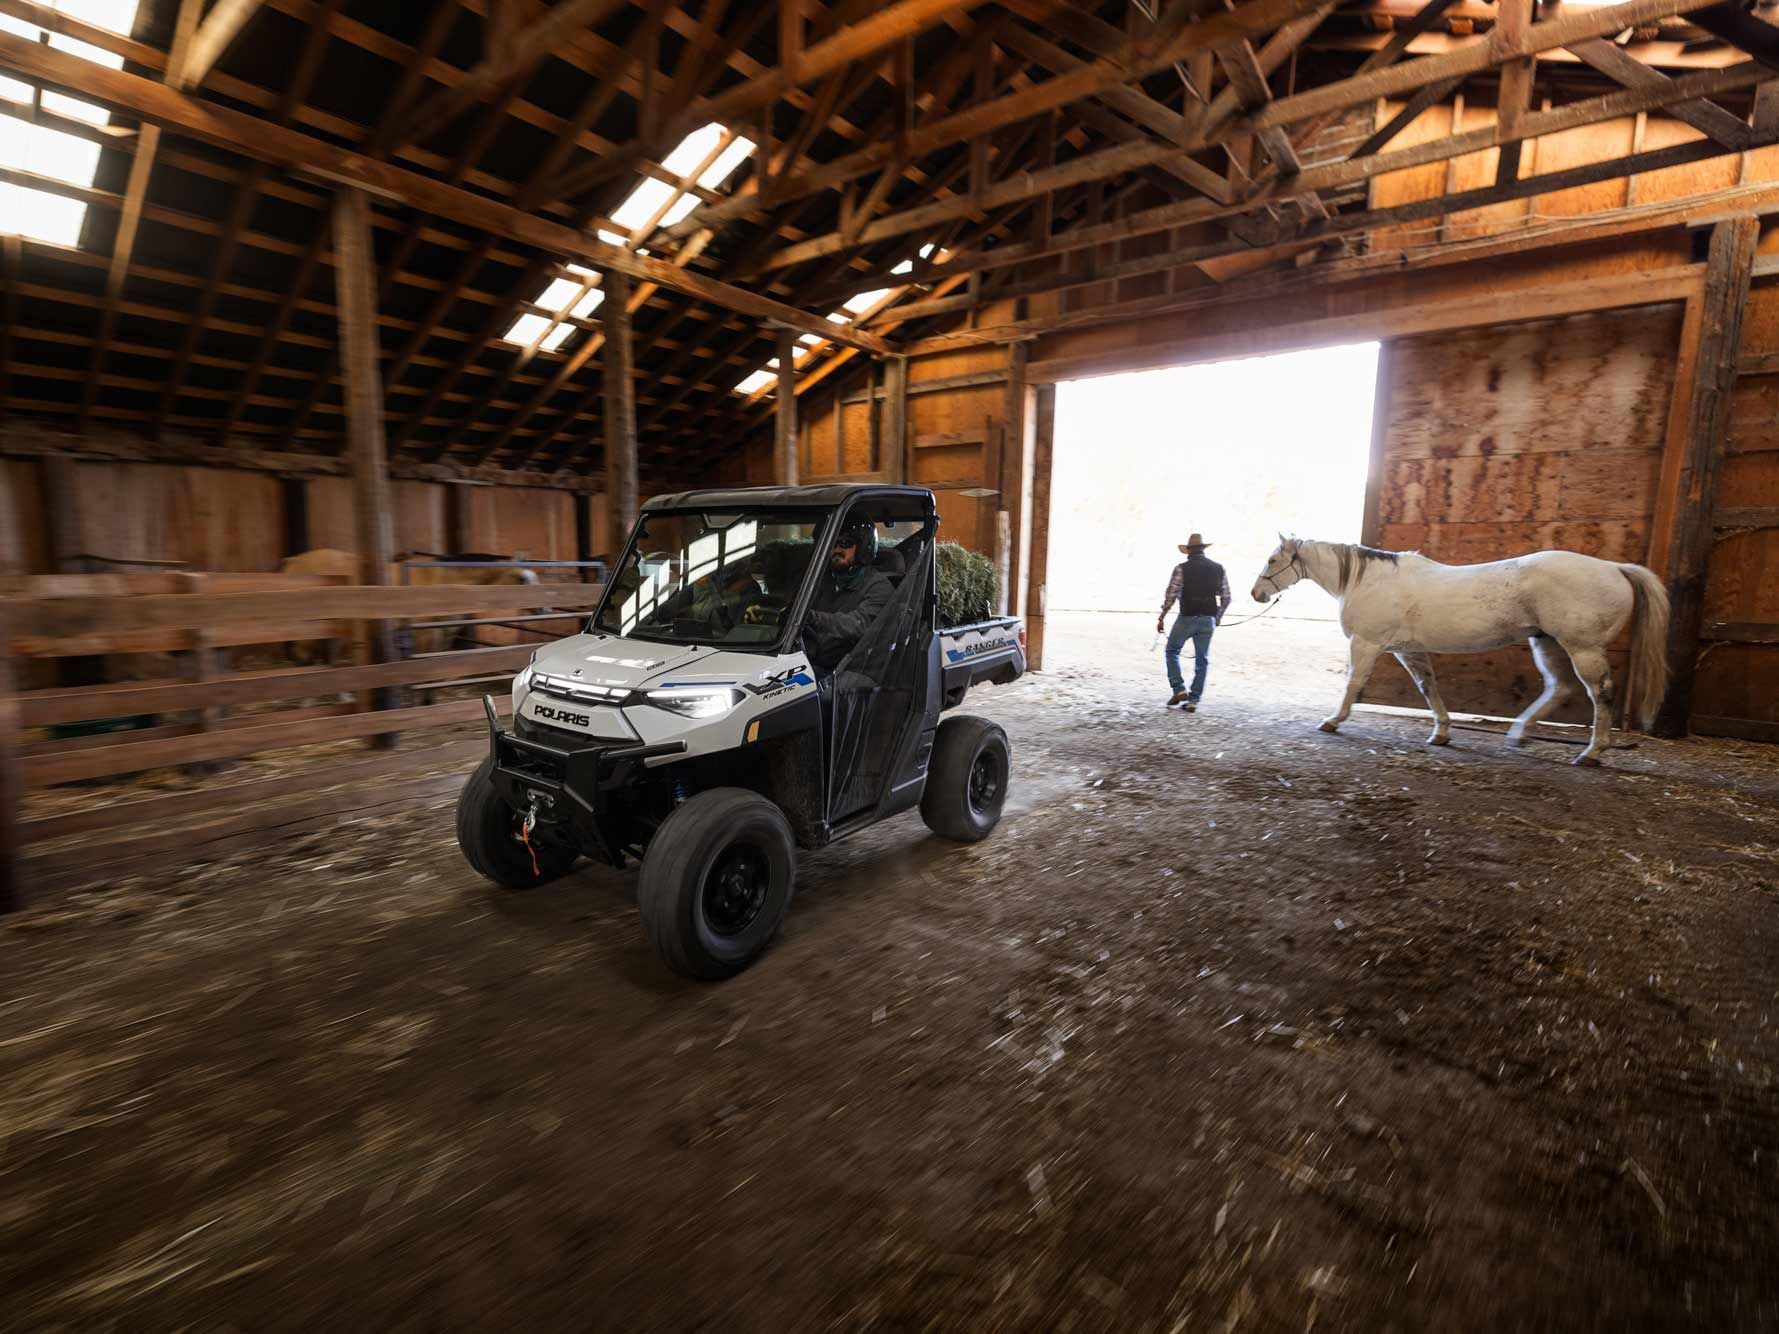 With a virtually silent electric powertrain, the Ranger Kinetic excels at work around sensitive animals and neighbors.